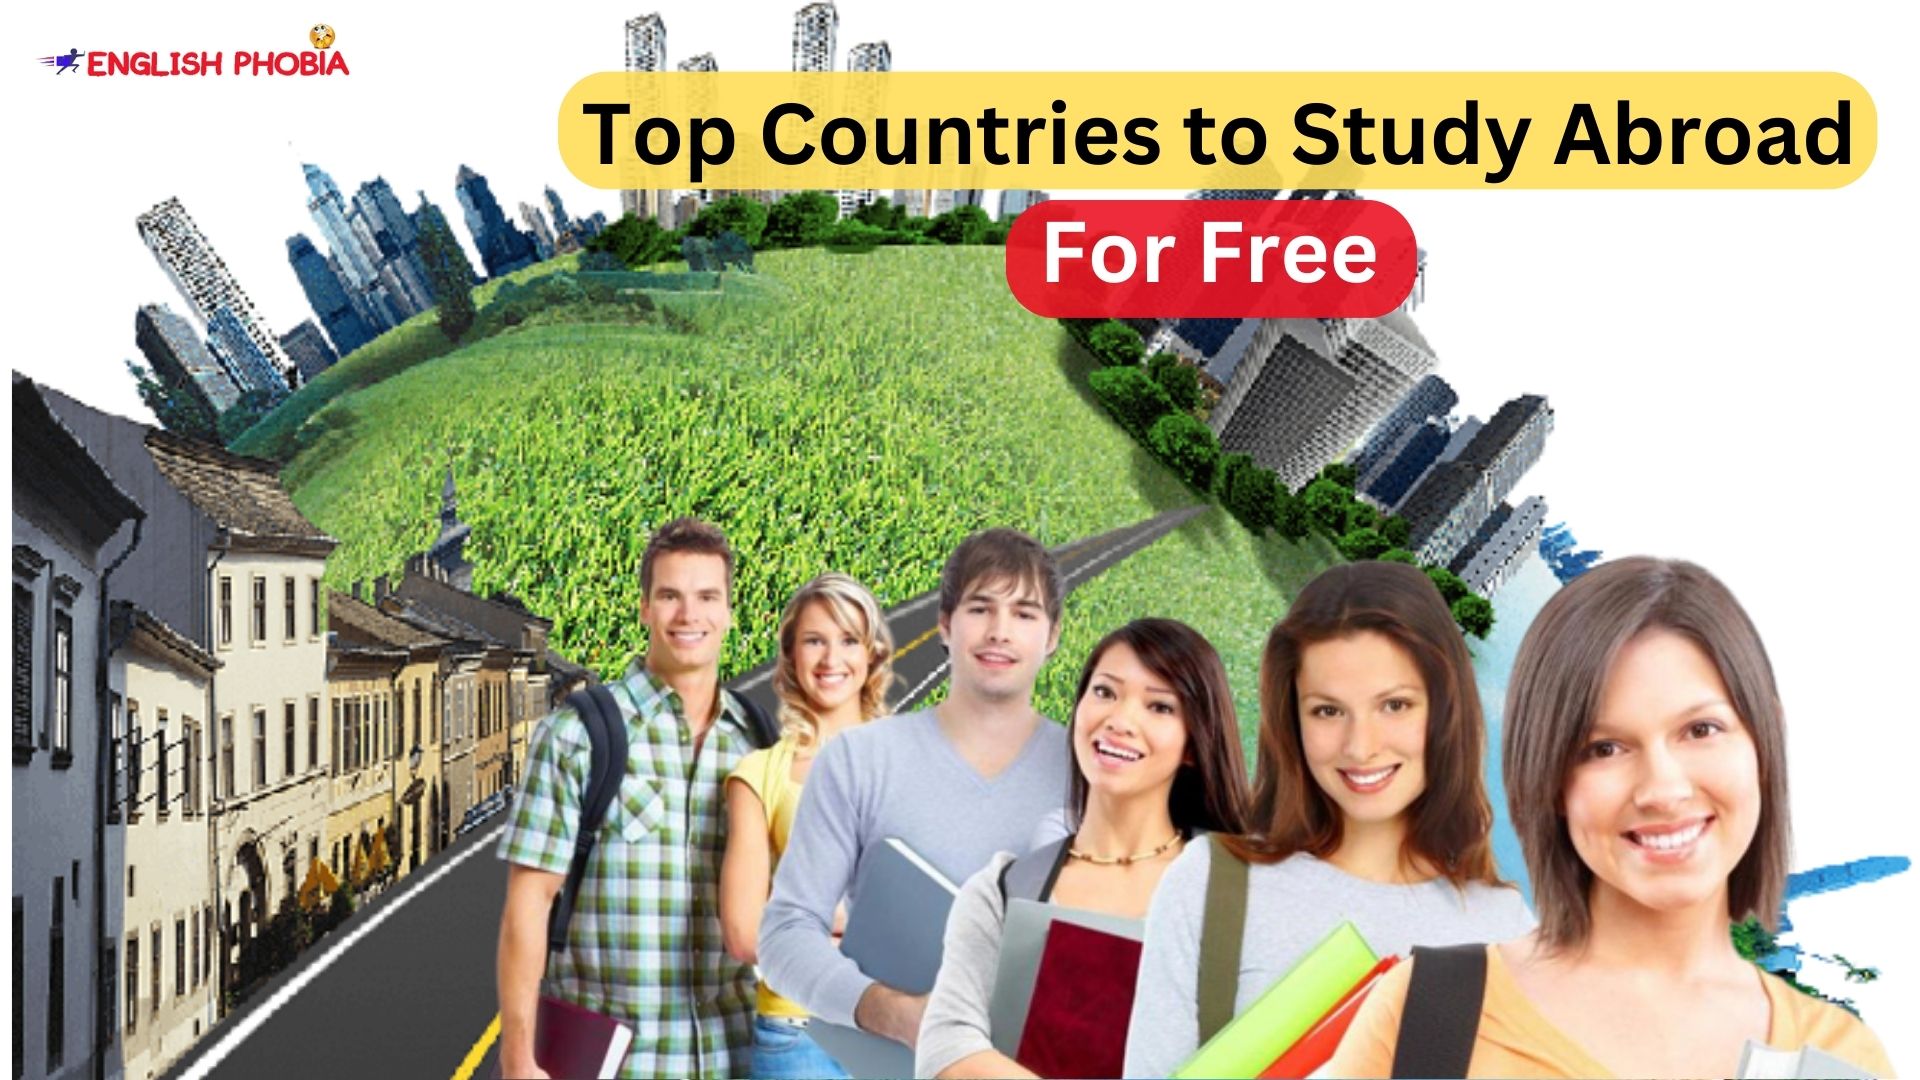 Top Countries to Study Abroad For Free